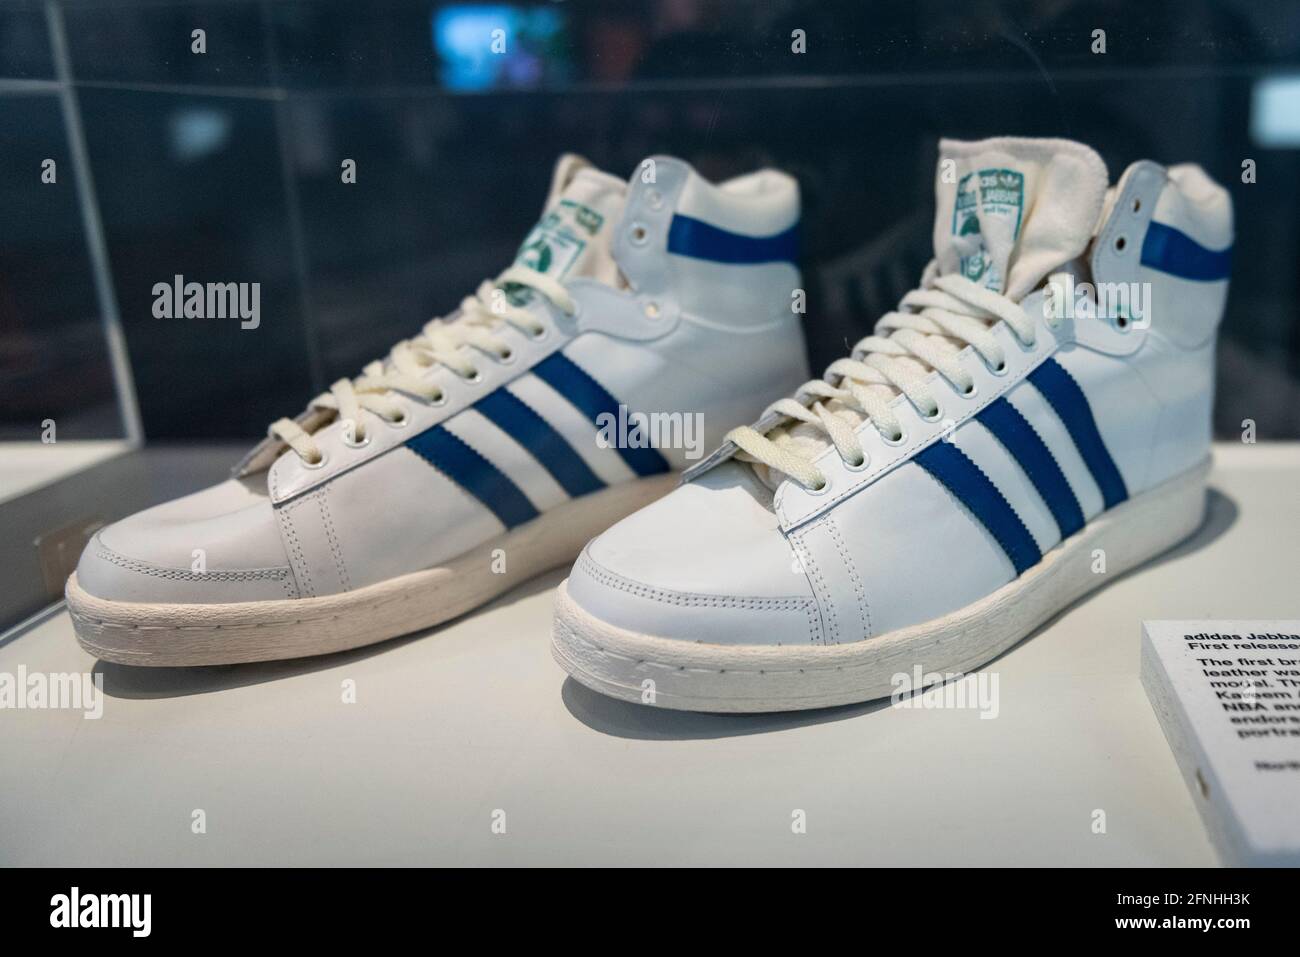 London, UK. 17 May 2021. "Adidas Jabbar", 1980s, first released in 1977,  and worn by NBA legend Kareem Abdul Jabbar. Preview of “Sneakers Unboxed:  Studio to Street” at the Design Museum in